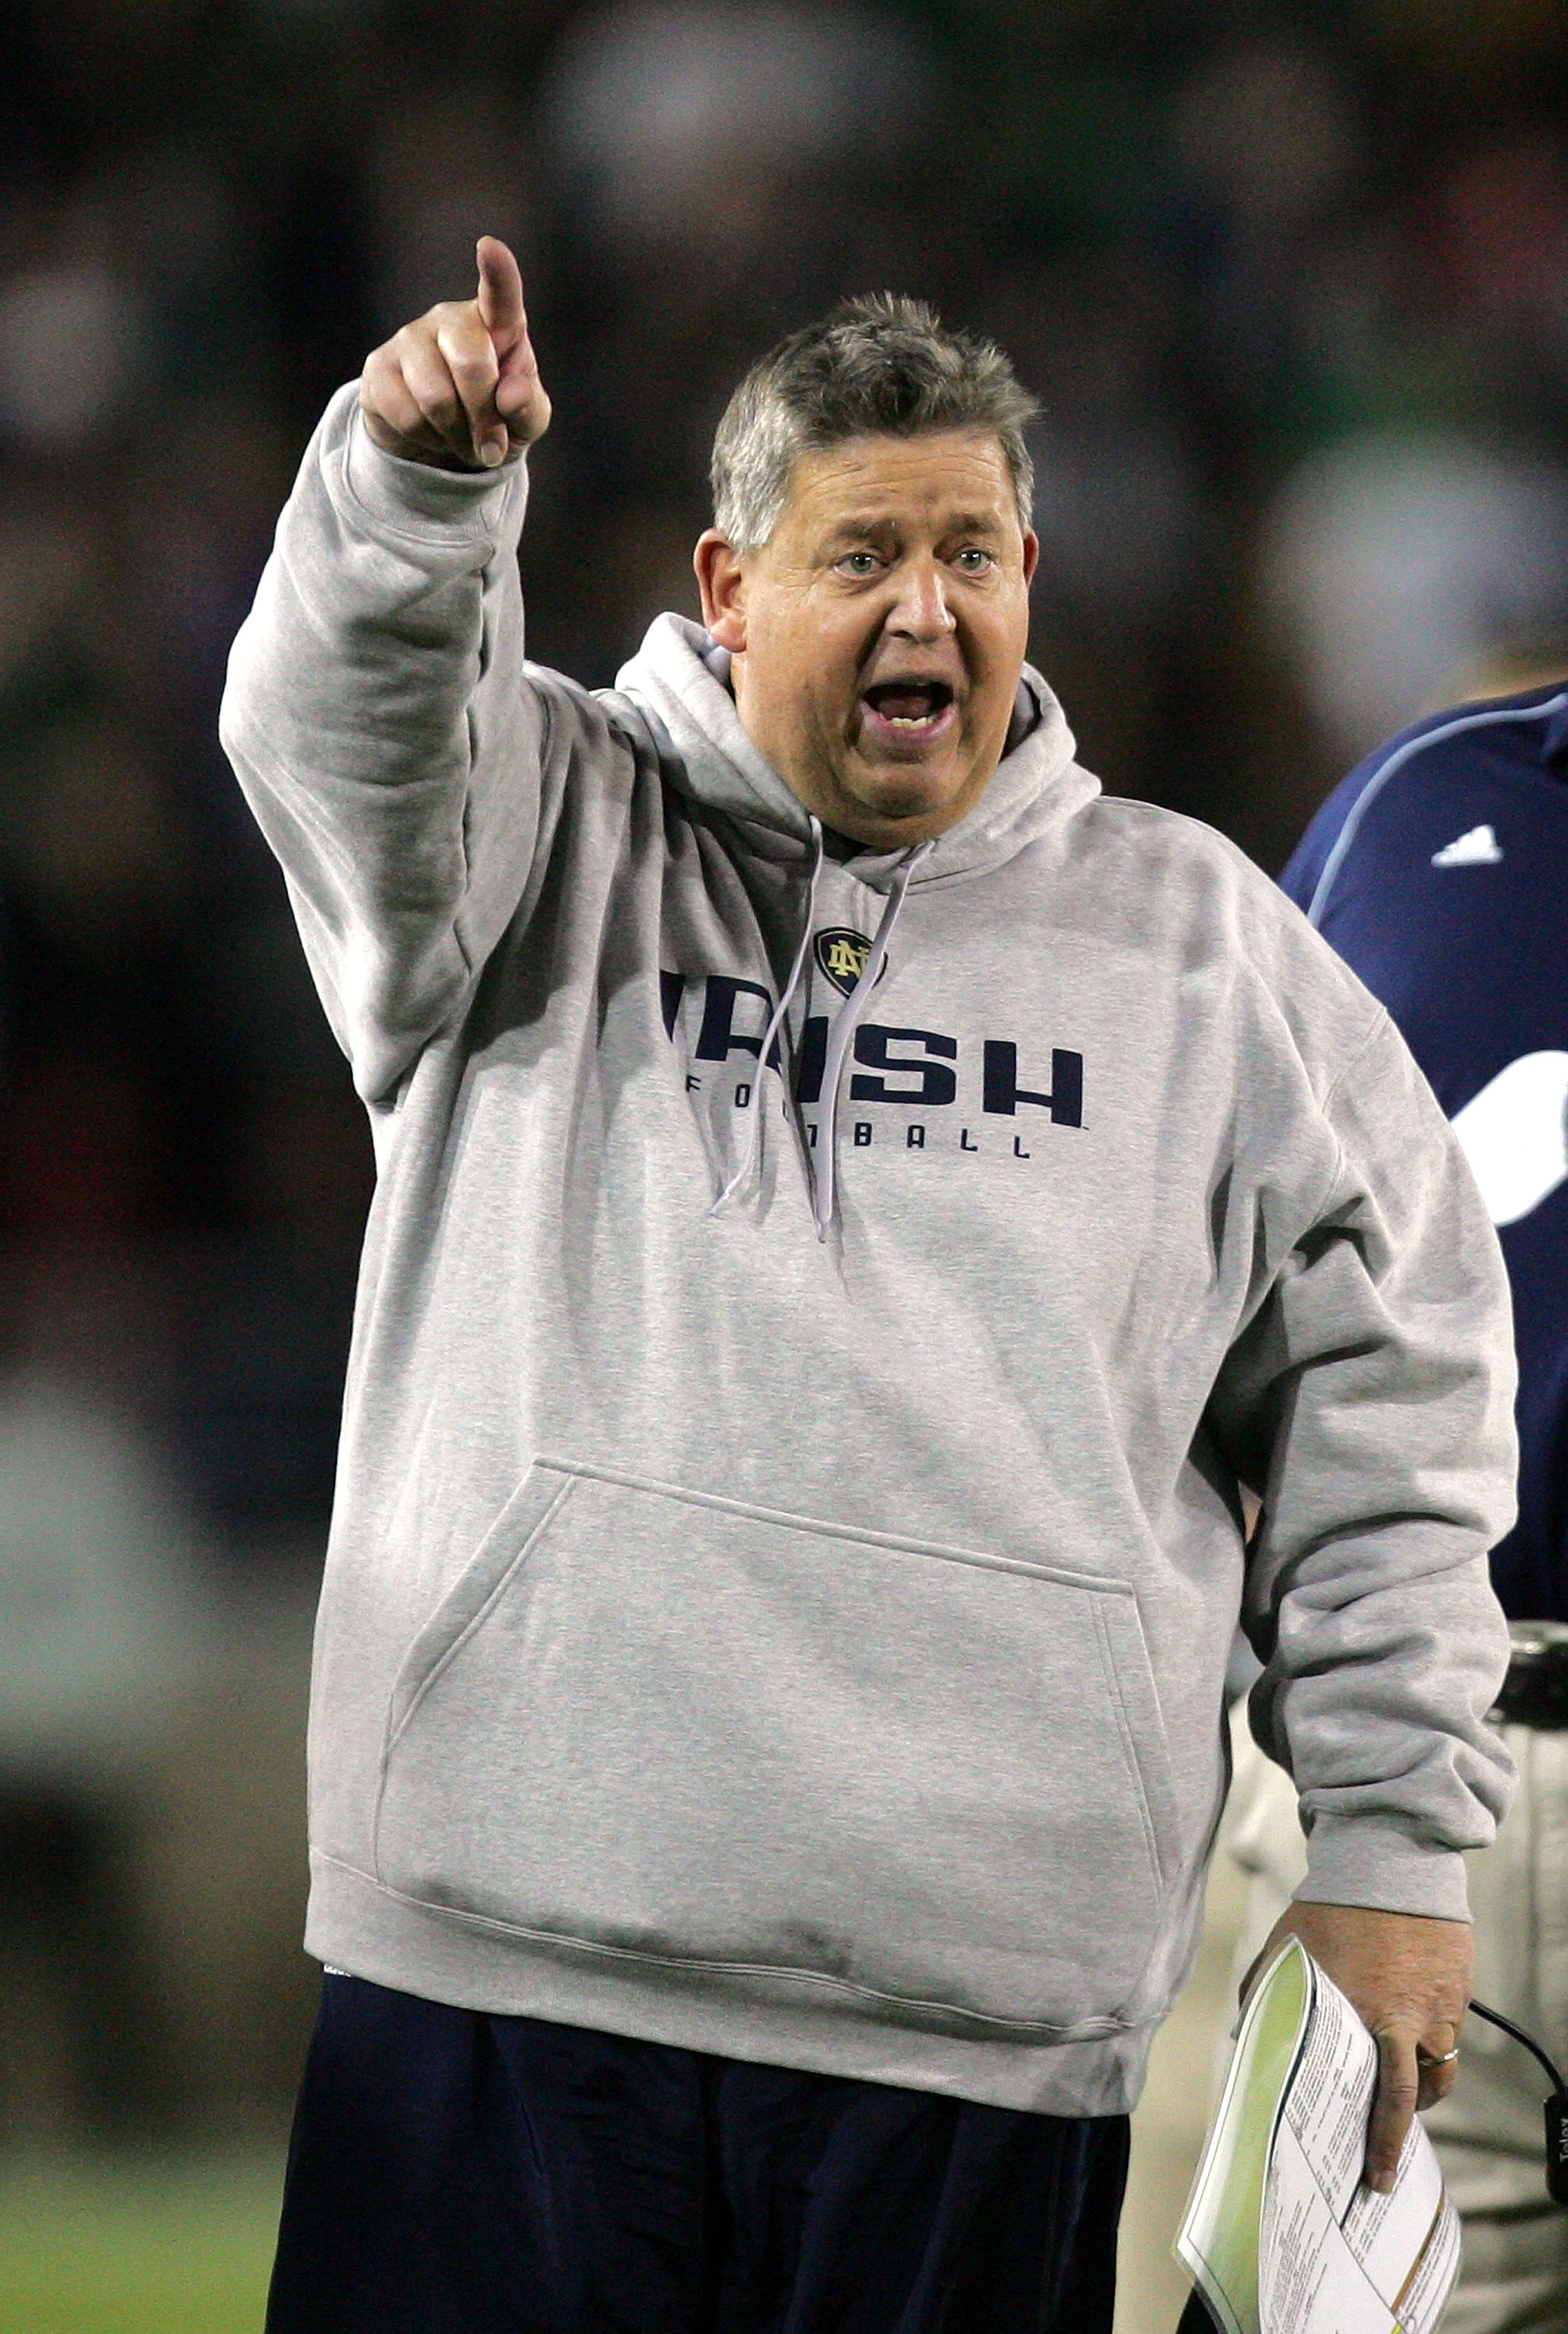 PALO ALTO, CA - NOVEMBER 28:  Notre Dame head coach Charlie Weis argues a call during their game against the Stanford Cardinal at Stanford Stadium on November 28, 2009 in Palo Alto, California.  (Photo by Ezra Shaw/Getty Images)